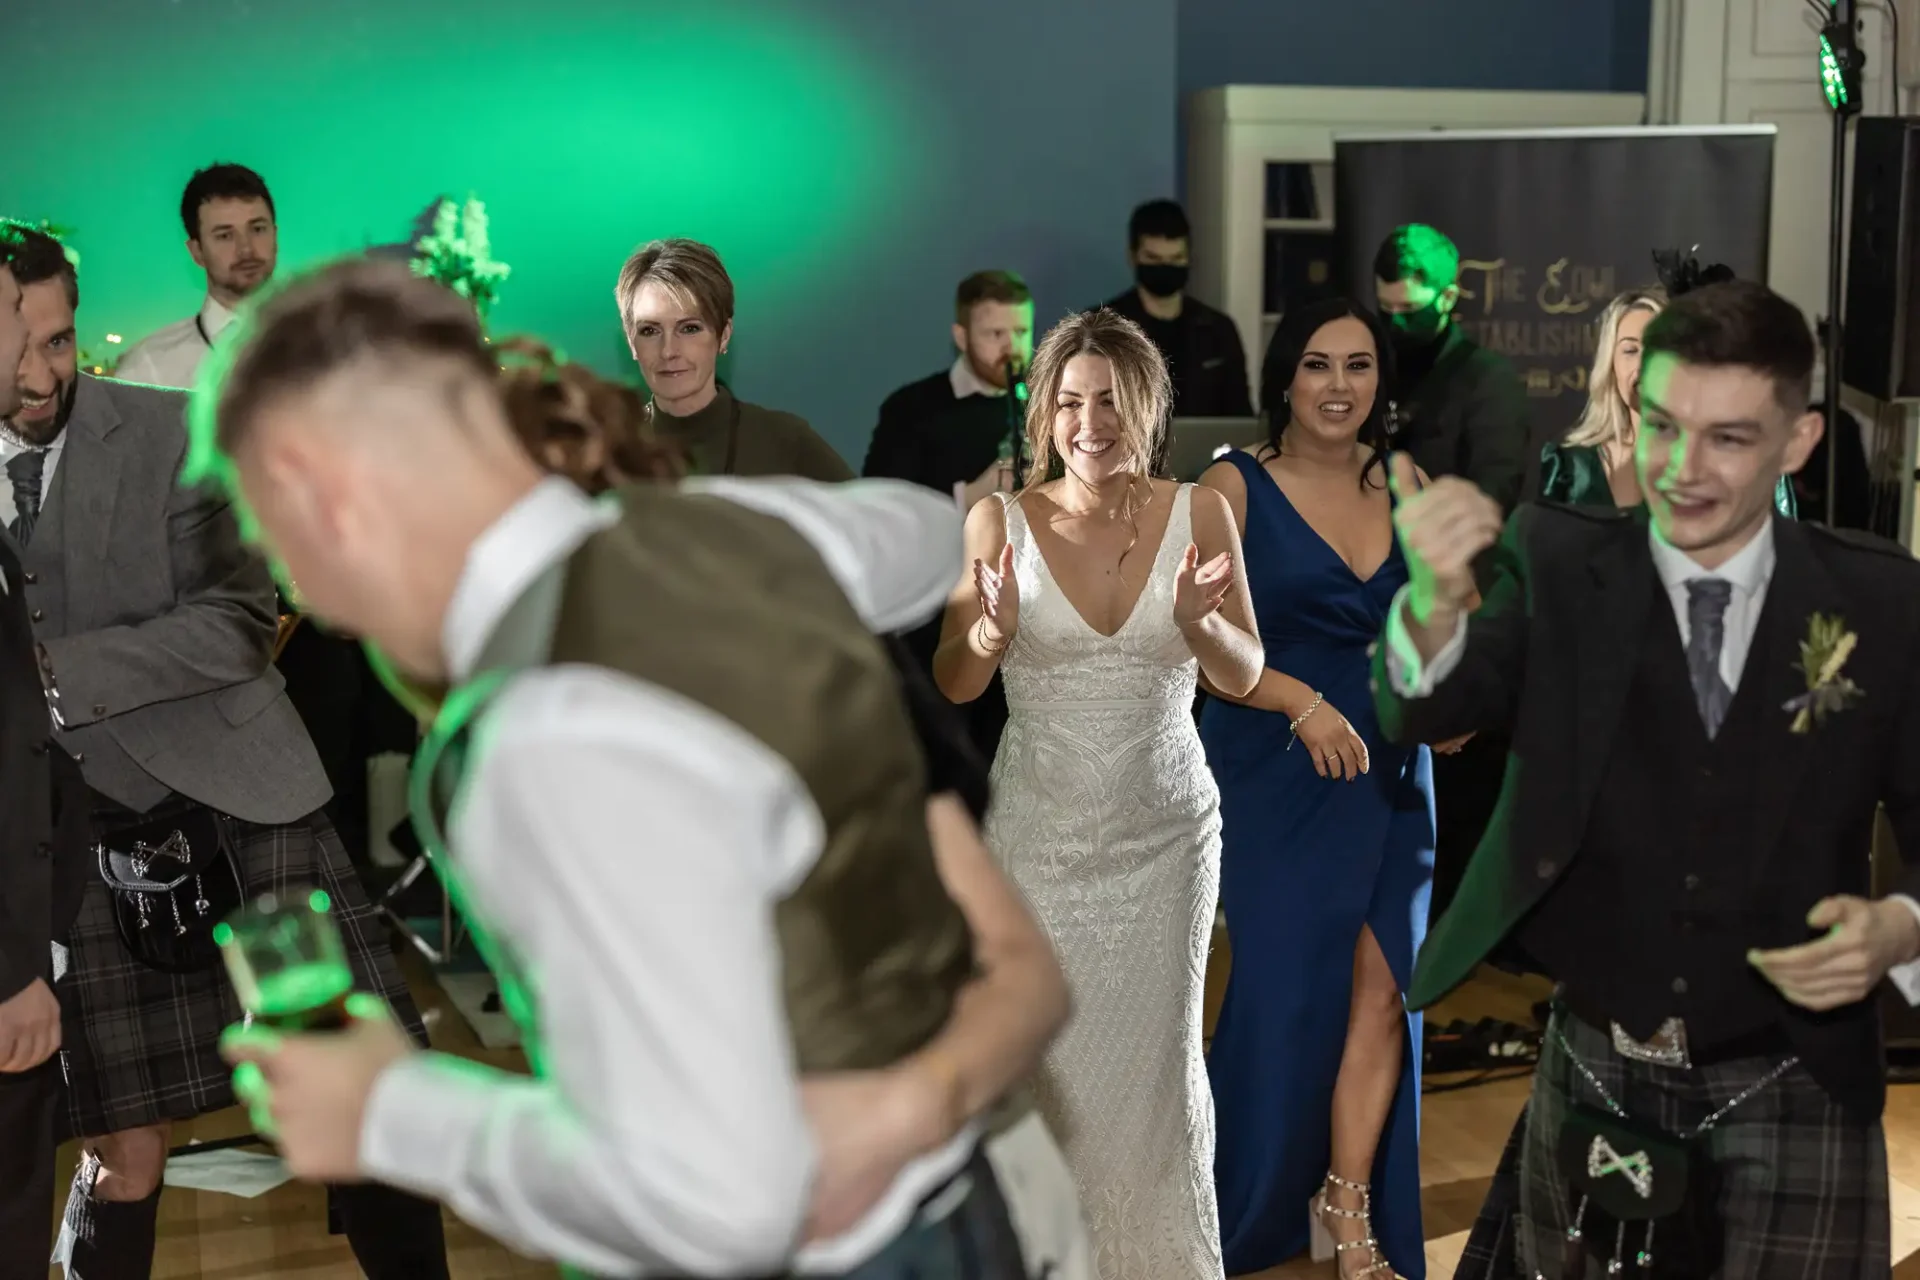 A bride laughs joyfully while dancing with guests at a wedding reception. some men are dressed in kilts; a green light adds ambiance in the background.